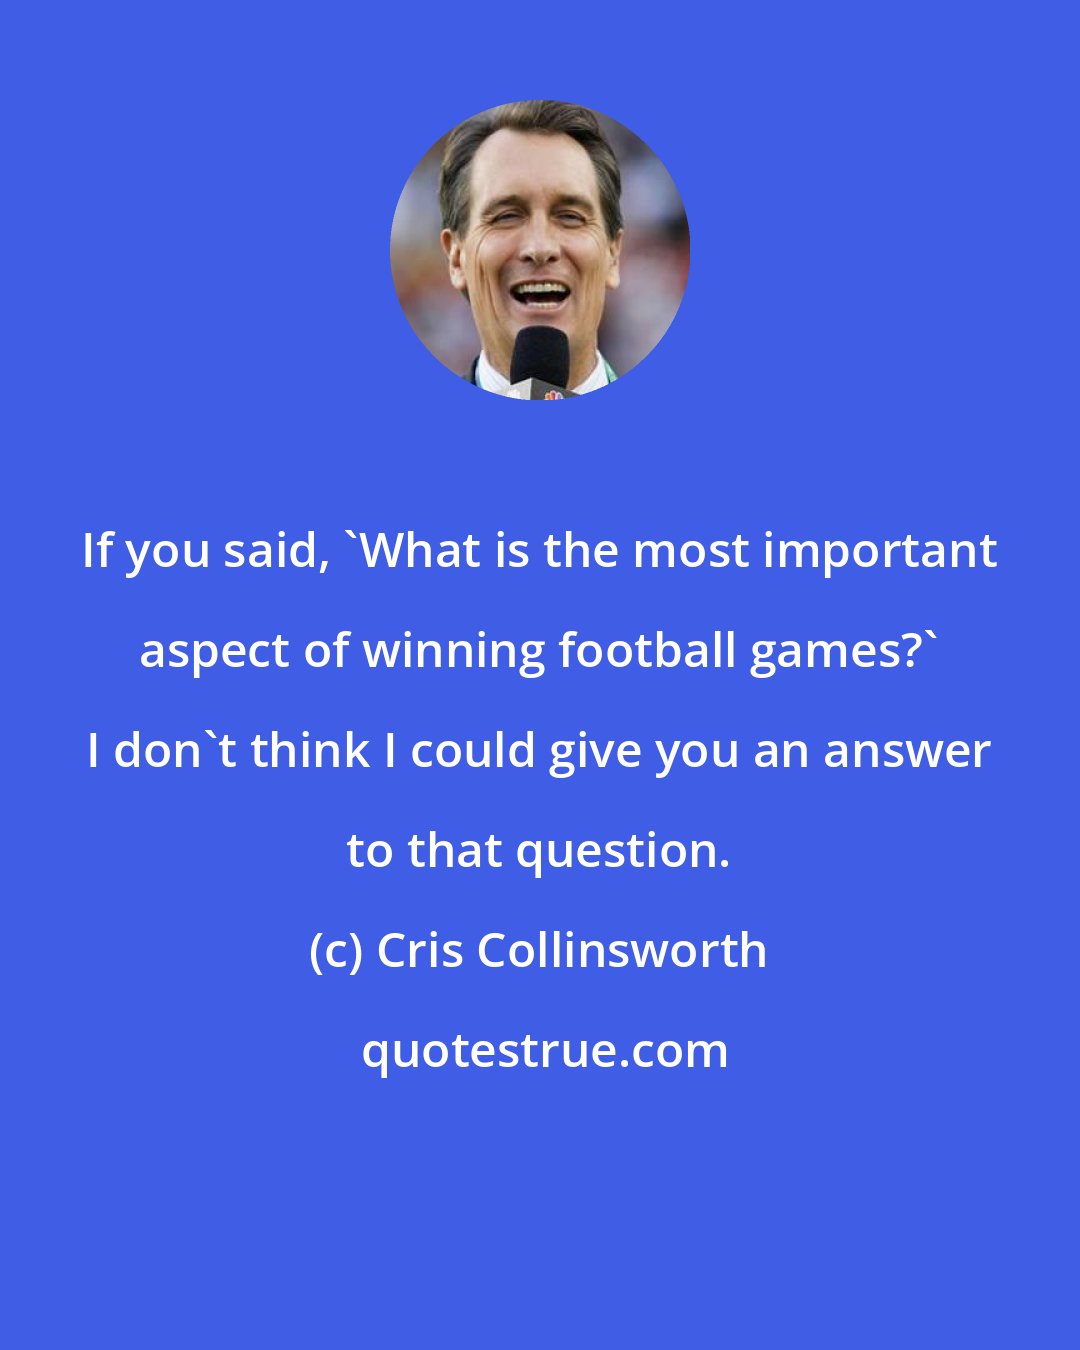 Cris Collinsworth: If you said, 'What is the most important aspect of winning football games?' I don't think I could give you an answer to that question.